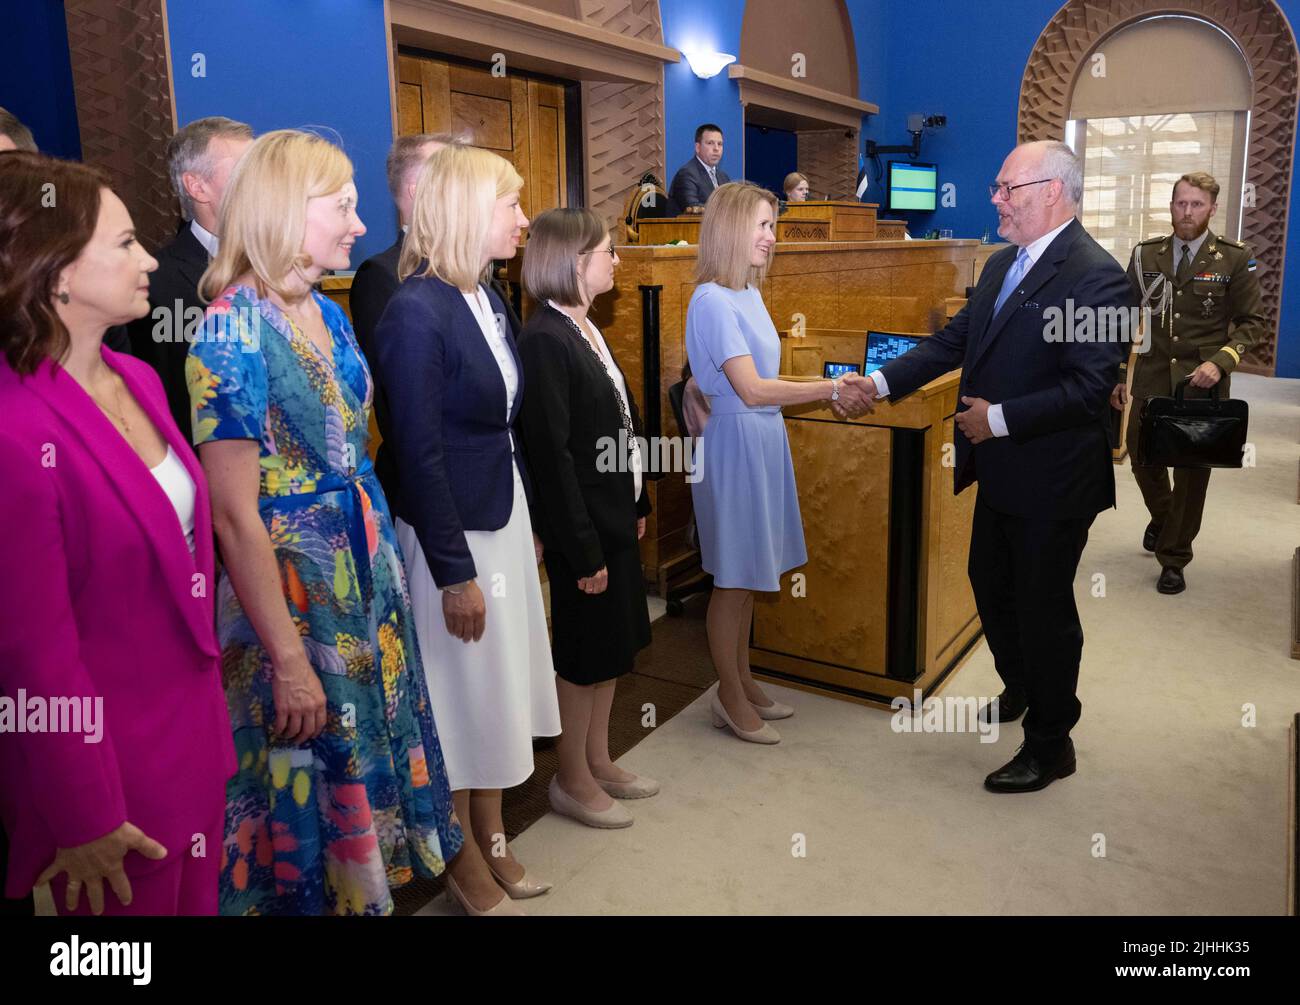 (220719) -- TALLINN, July 19, 2022 (Xinhua) -- Estonian President Alar Karis (2nd R) shakes hands with Estonian Prime Minister and Reform Party Chairwoman Kaja Kallas (3rd R) to congratulate on the new government coalition's taking office in the Estonian Parliament (Riigikogu) in Tallinn, Estonia, July 18, 2022. The members of Estonia's new government coalition of the Reform Party, the conservative Isamaa (Fatherland) Party and the Social Democratic Party (SDE) were sworn in in front of the Parliament (Riigikogu) on Monday. (Erik Peinar/Parliament of Estonia/Handout via Xinhua) Stock Photo